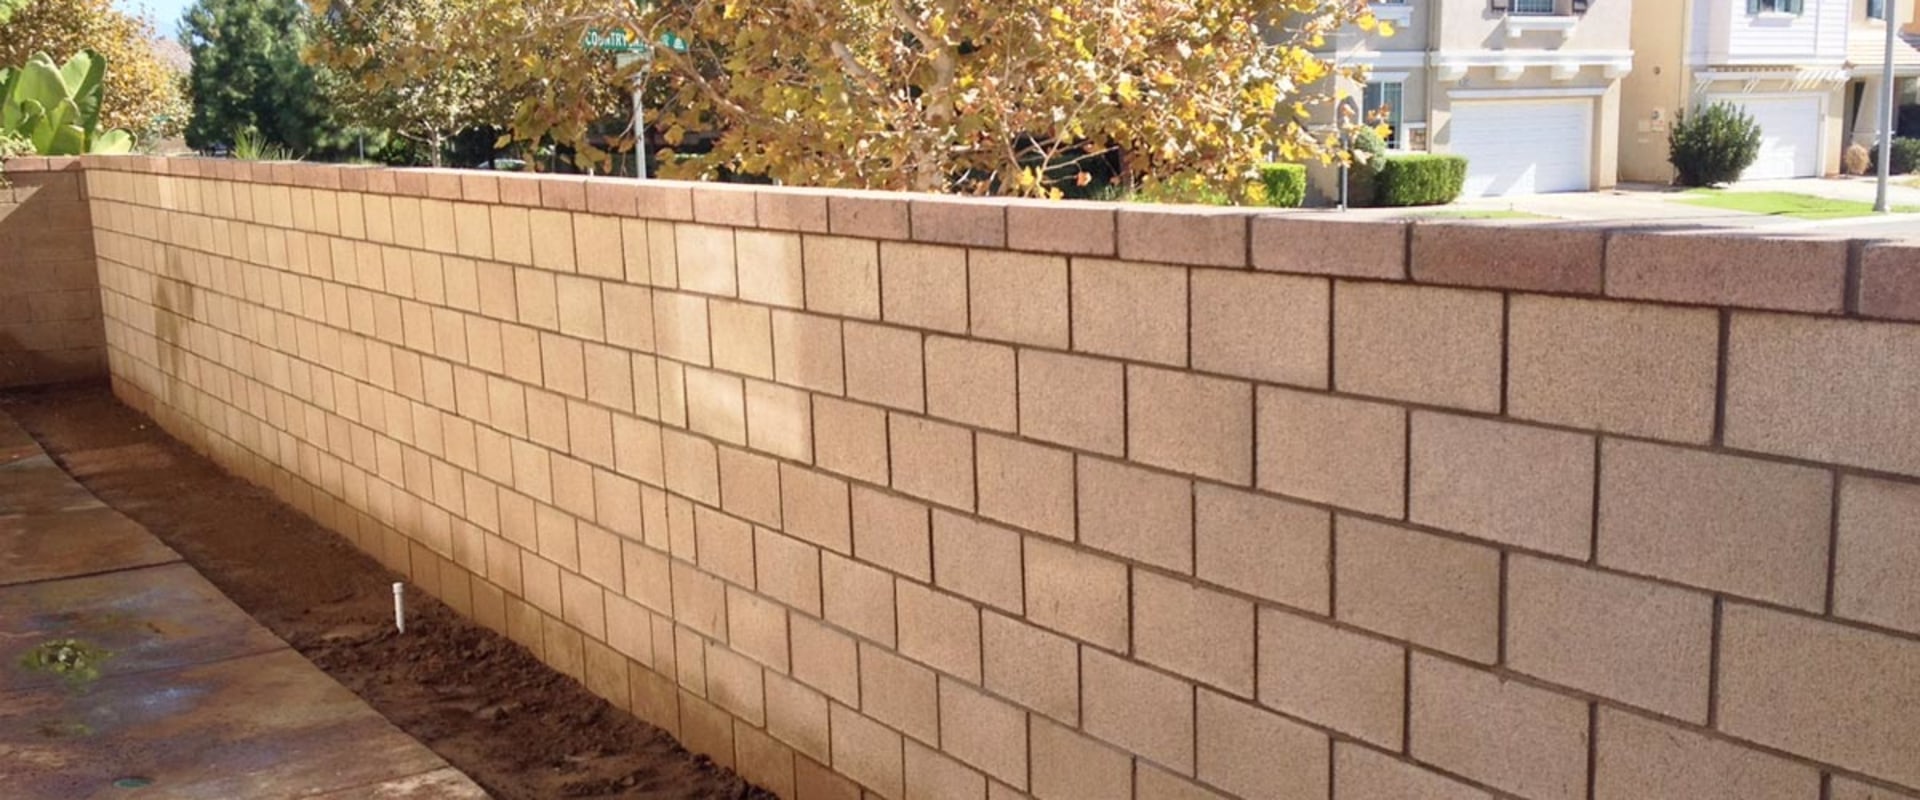 How Much Does it Cost to Repair a Block Wall?